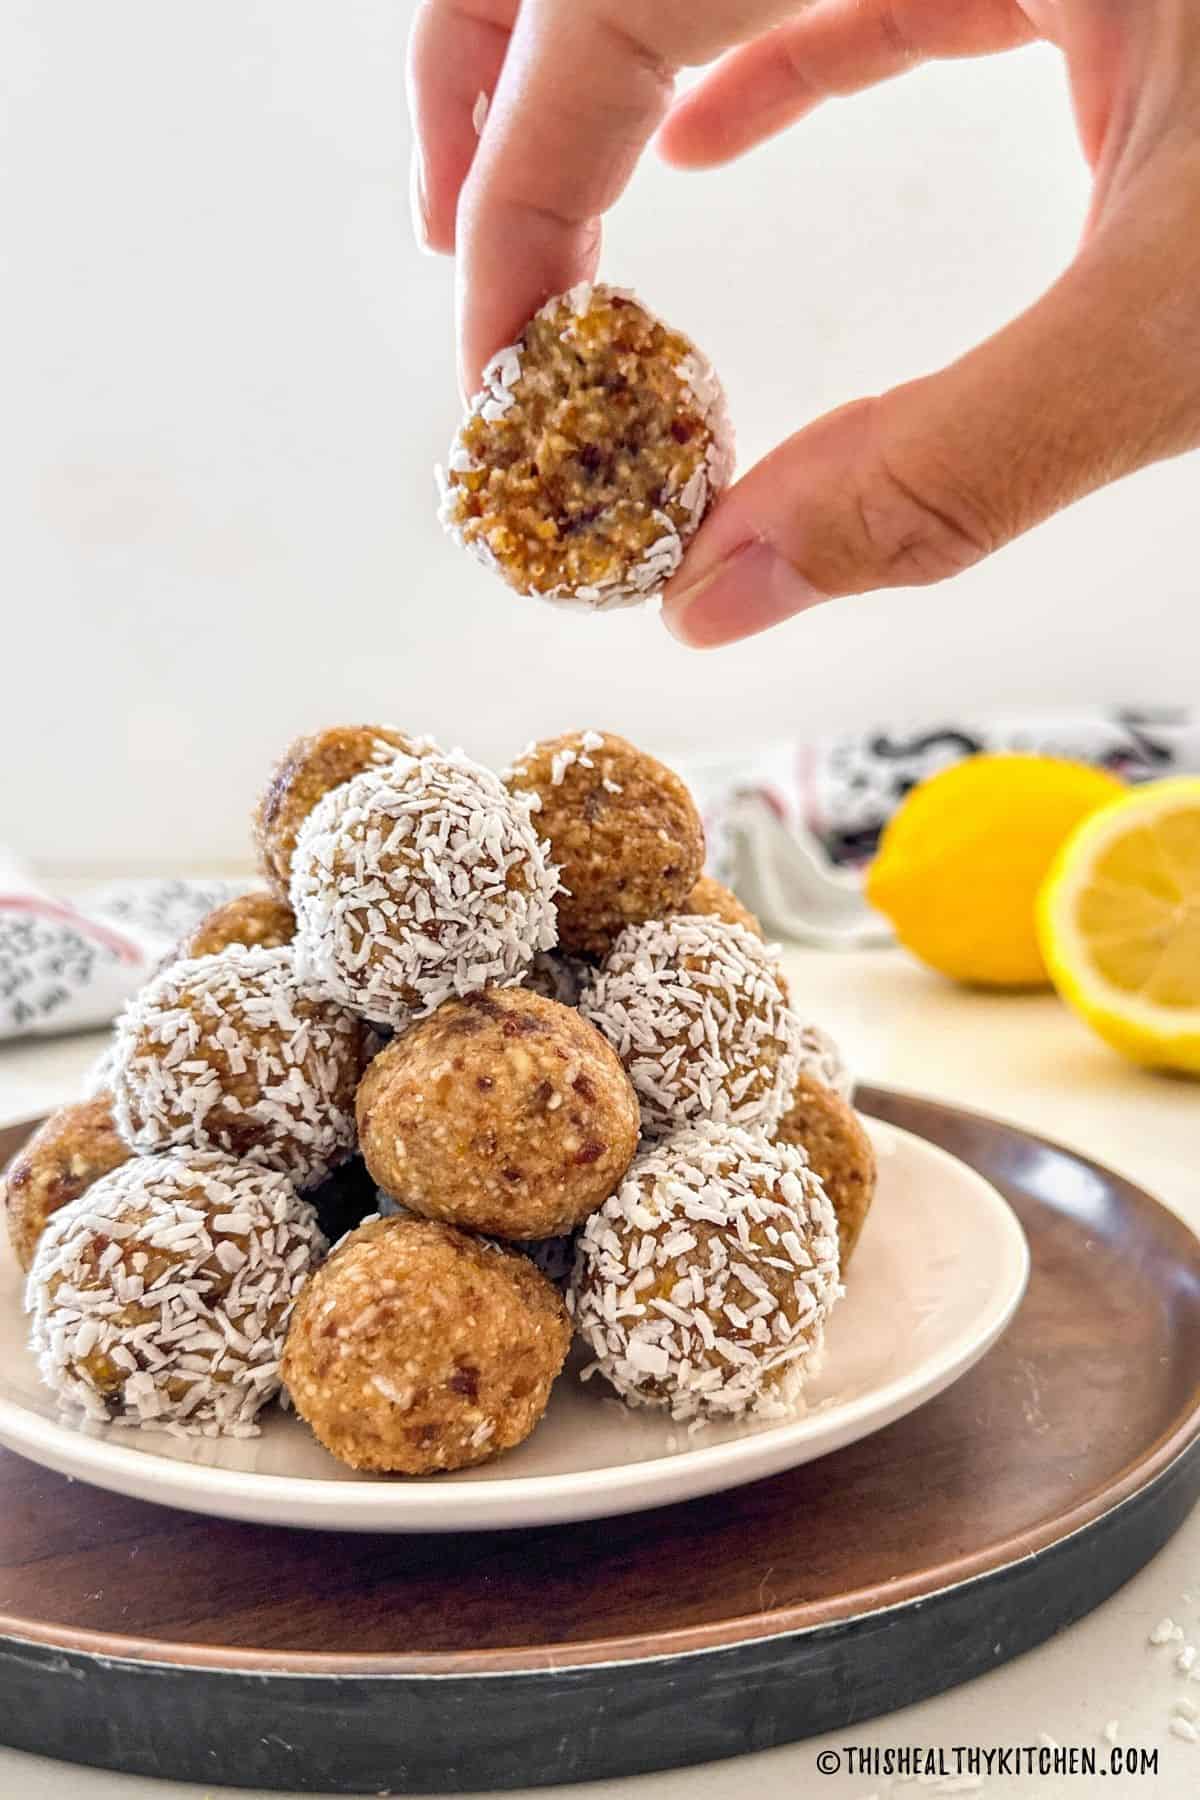 Plate of lemon bliss balls with hand holding up one that is bitten in half.